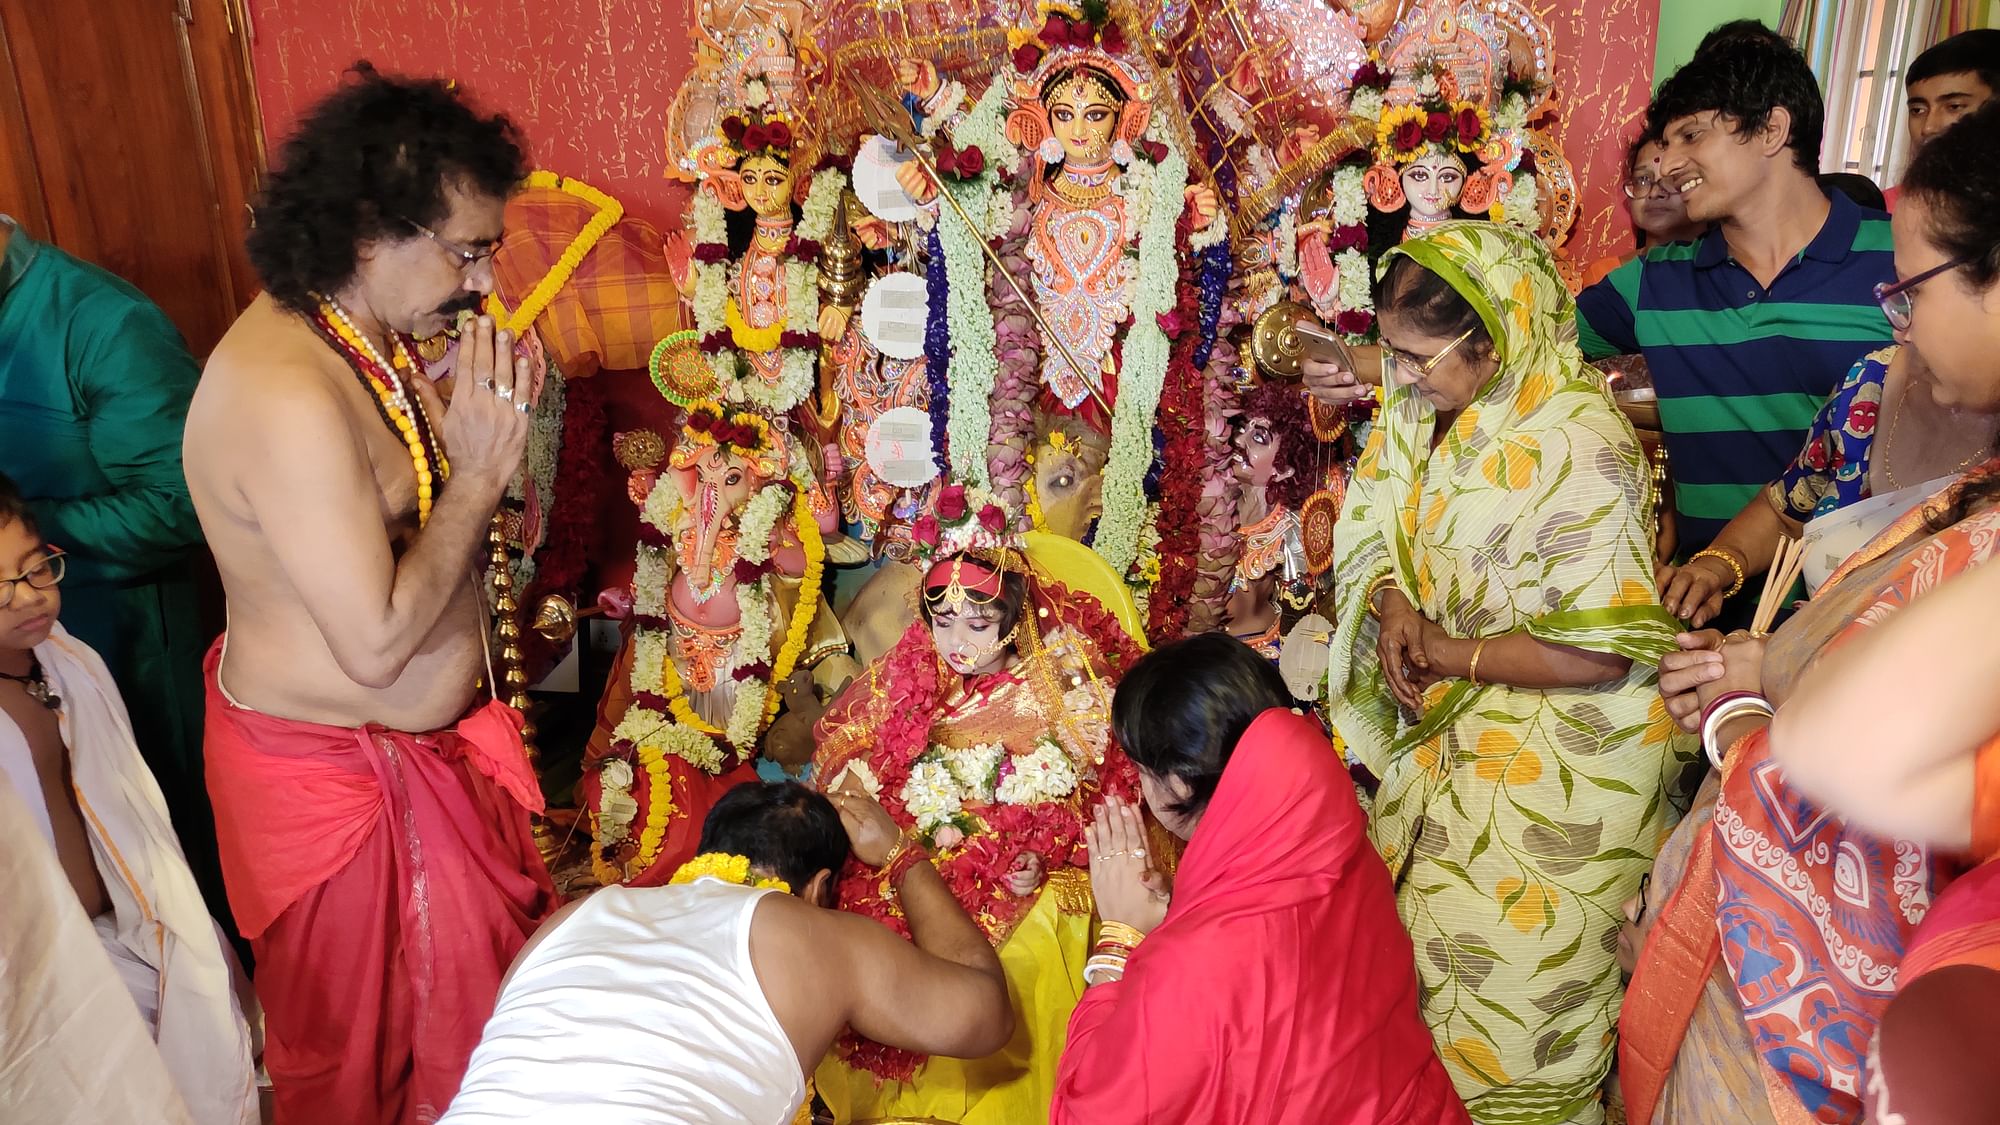 Traditionally, Kumari Pujo is the worship of girls who have not yet attained puberty as the Goddess on Mahashtami on the second day of Durga Puja.